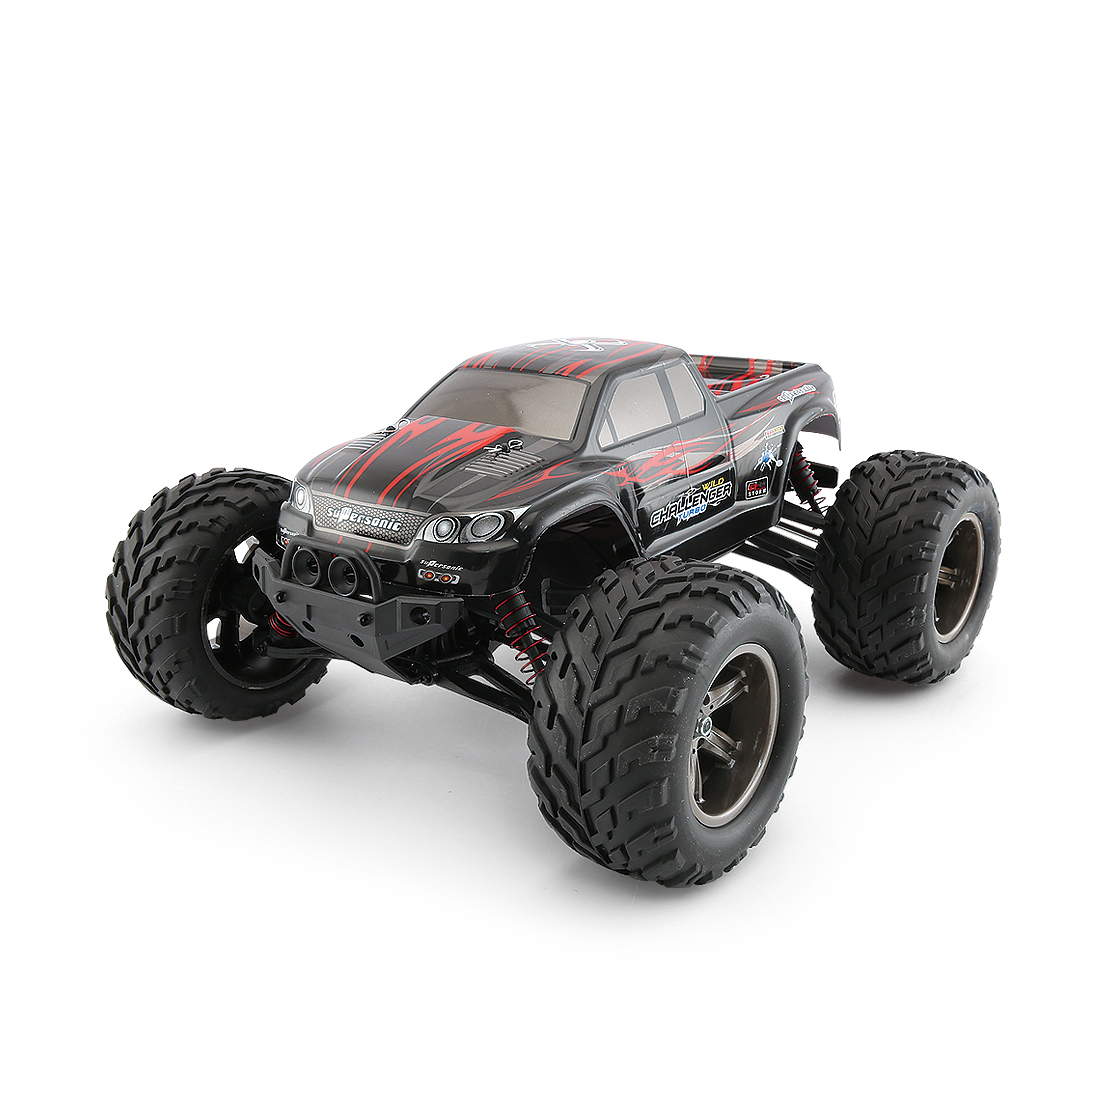 Singda New Arriving 1:12 2.4Ghz 2WD   Full  Proportional Monster High speed  Truck SD9115